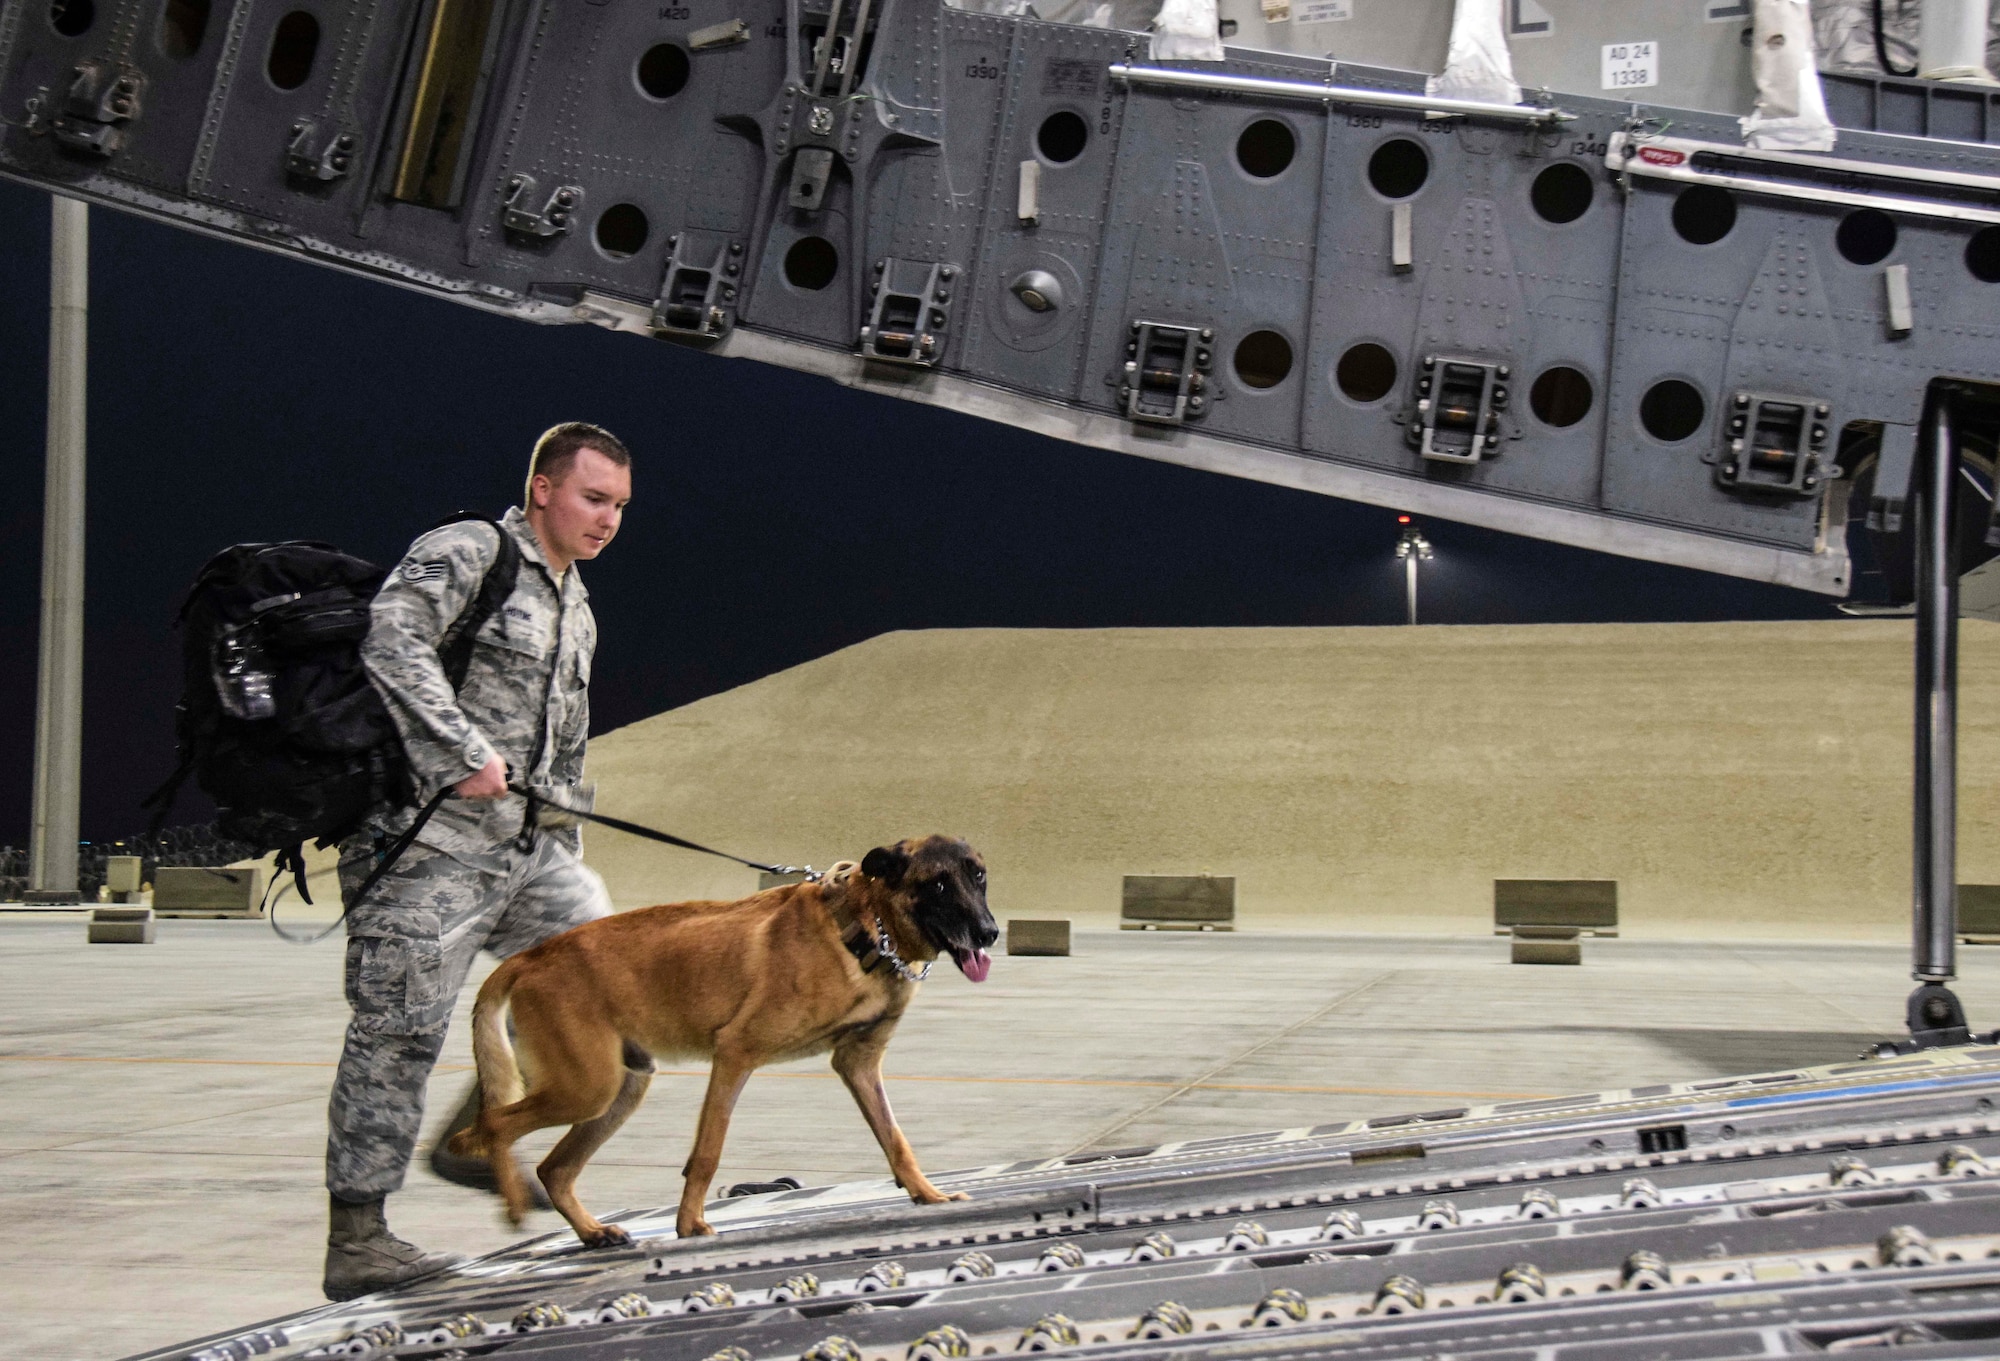 Military working dog Vvass looks at the camera as he leads his handler Staff Sgt. Christopher Hotine, 380th Expeditionary Security Forces Squadron, on board a C-17 Globemaster III Germany July 18, 2016, at Al Udeid Air Base, Qatar. VVass and Hotine were travelling through AUAB for treatment at a U.S. Army veterinary facility. (U.S. Air Force photo/Technical Sgt. Carlos J. Treviño)